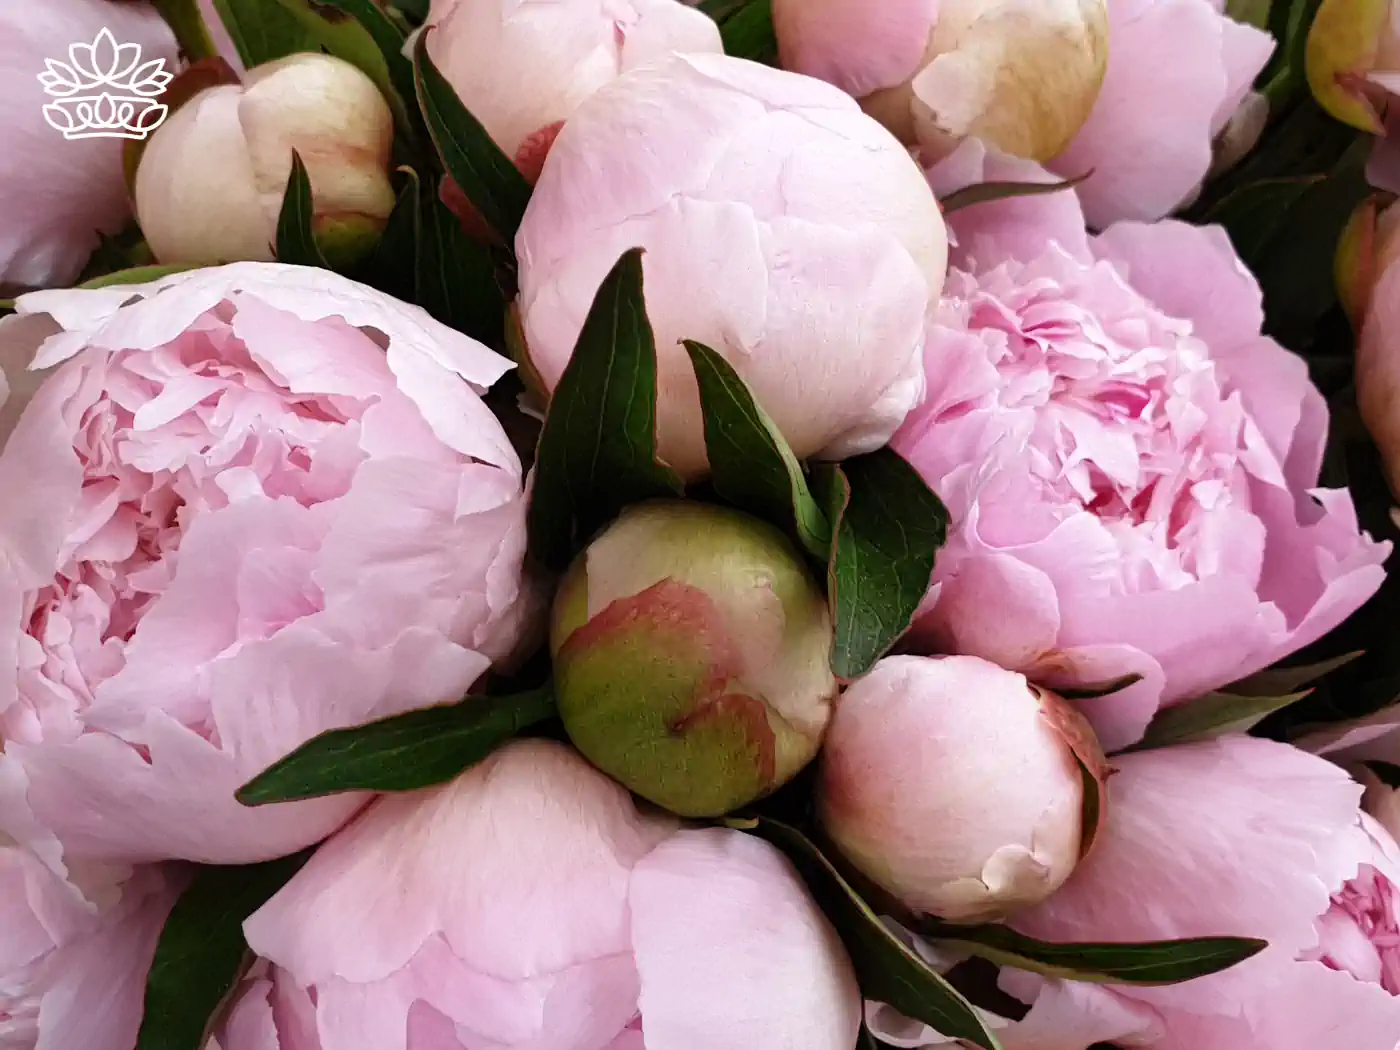 A close-up of lush pink peonies in full bloom. Fabulous Flowers and Gifts - Peonies Collection